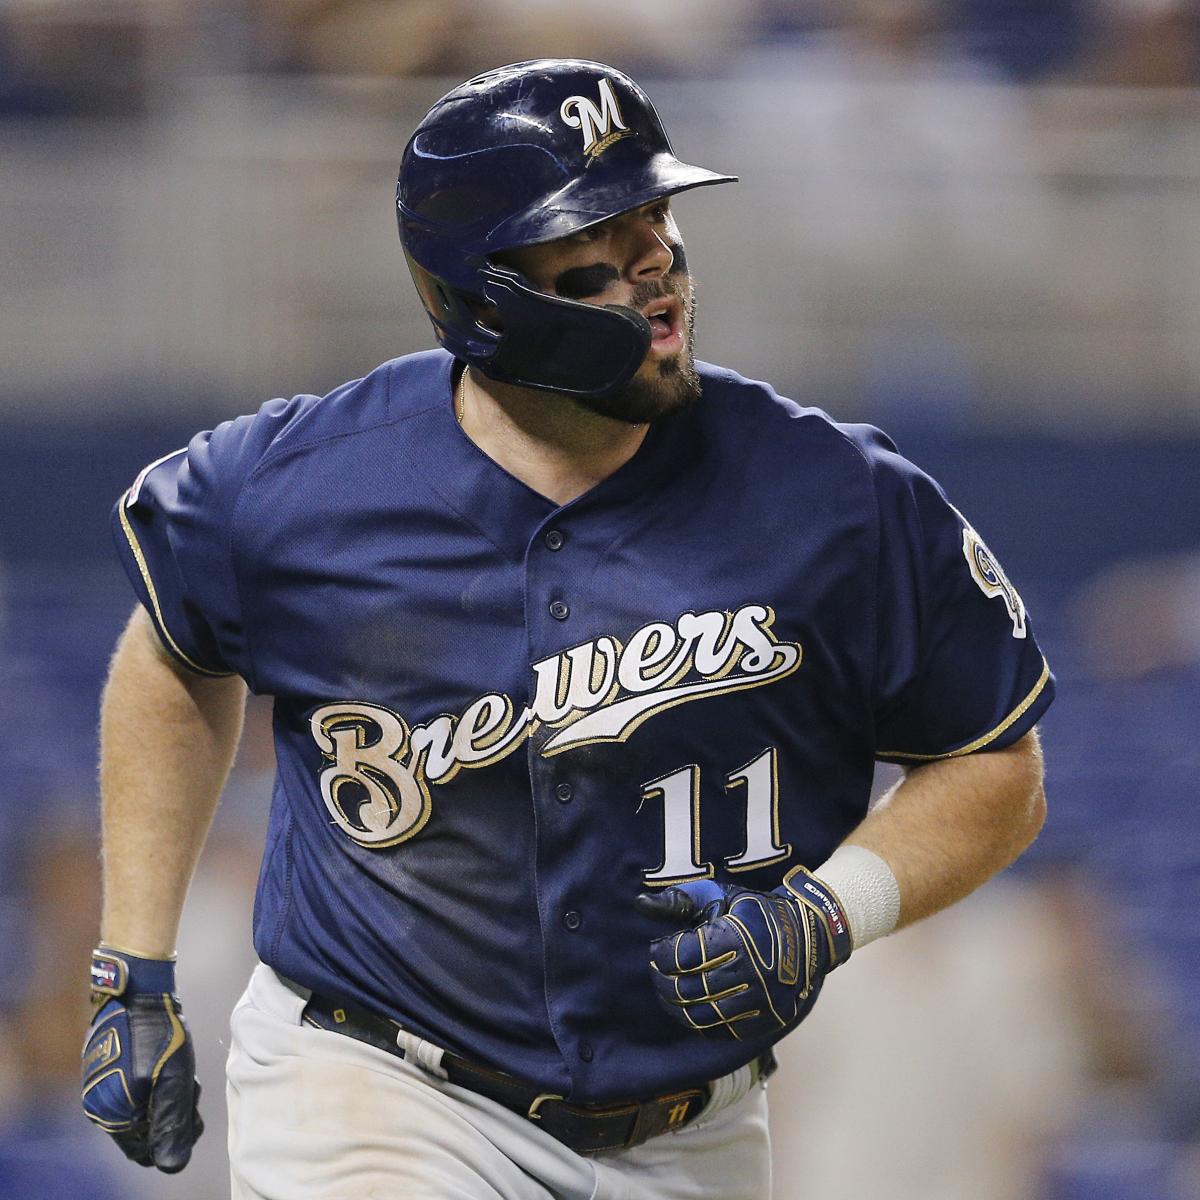 Can Mike Moustakas play second base for the Brewers? - Beyond the